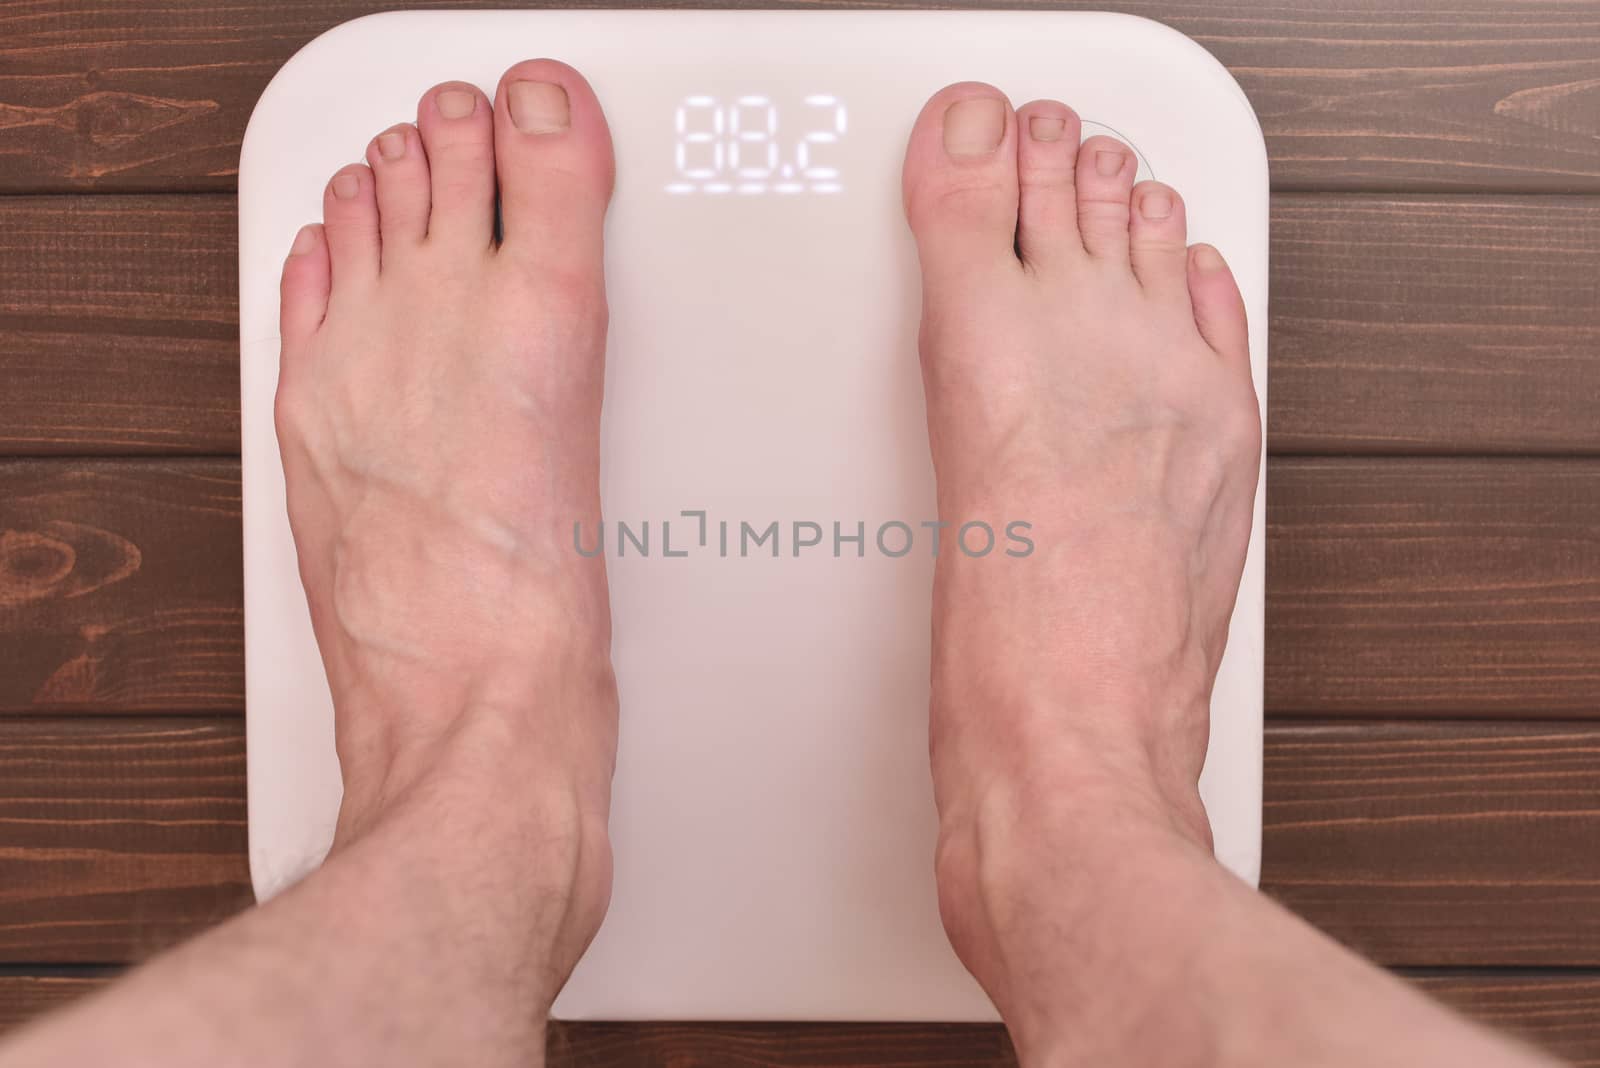 men's feet on an modern electronic scales. sports concept